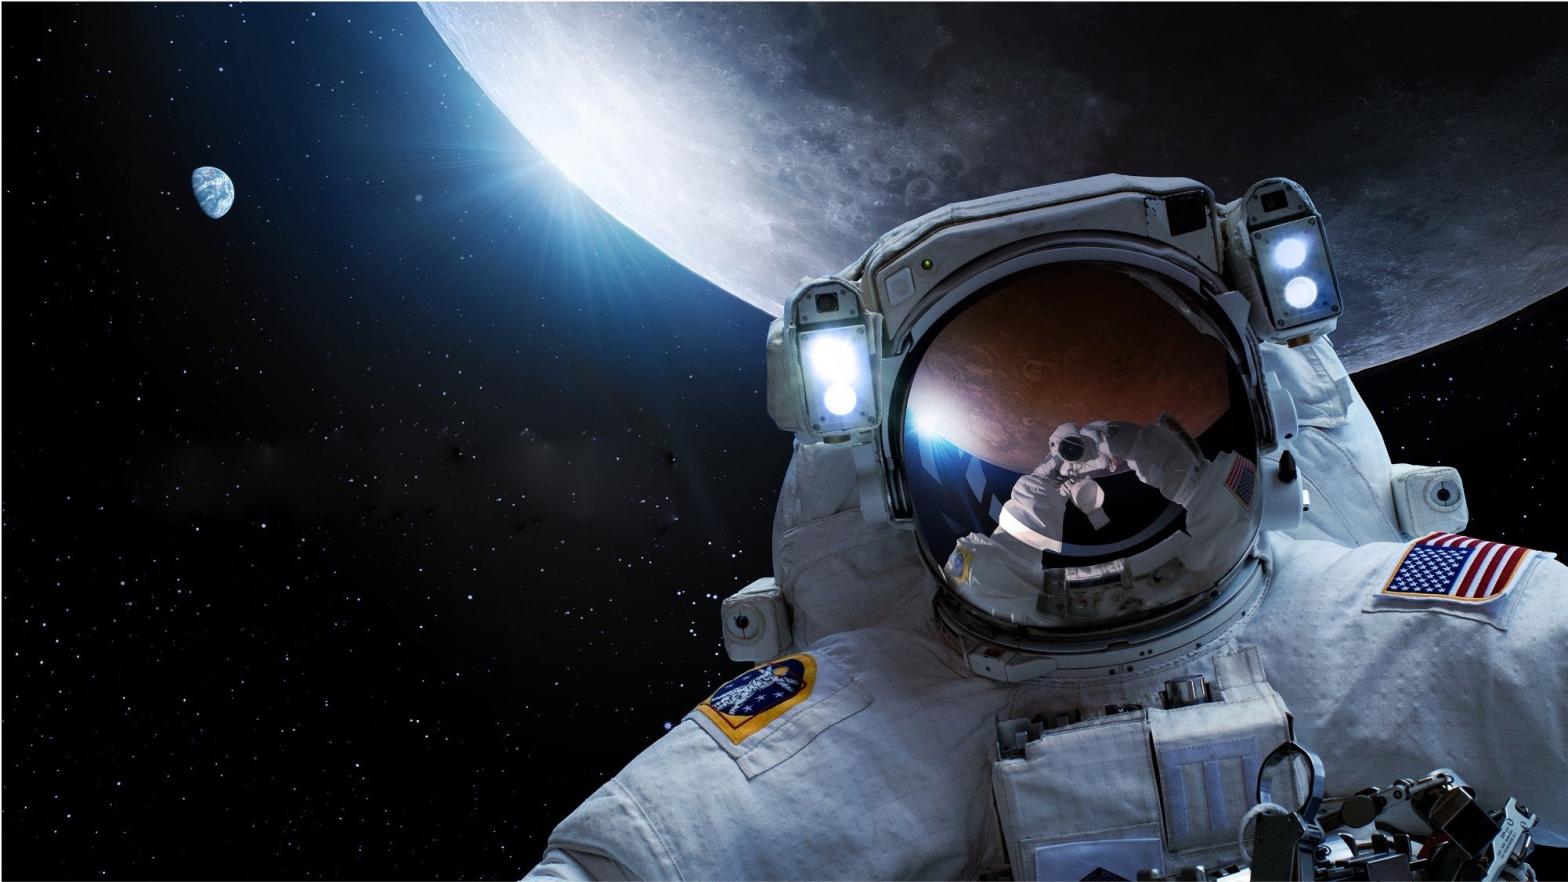 An illustration of an astronaut in front of the Moon. (Illustration: NASA)